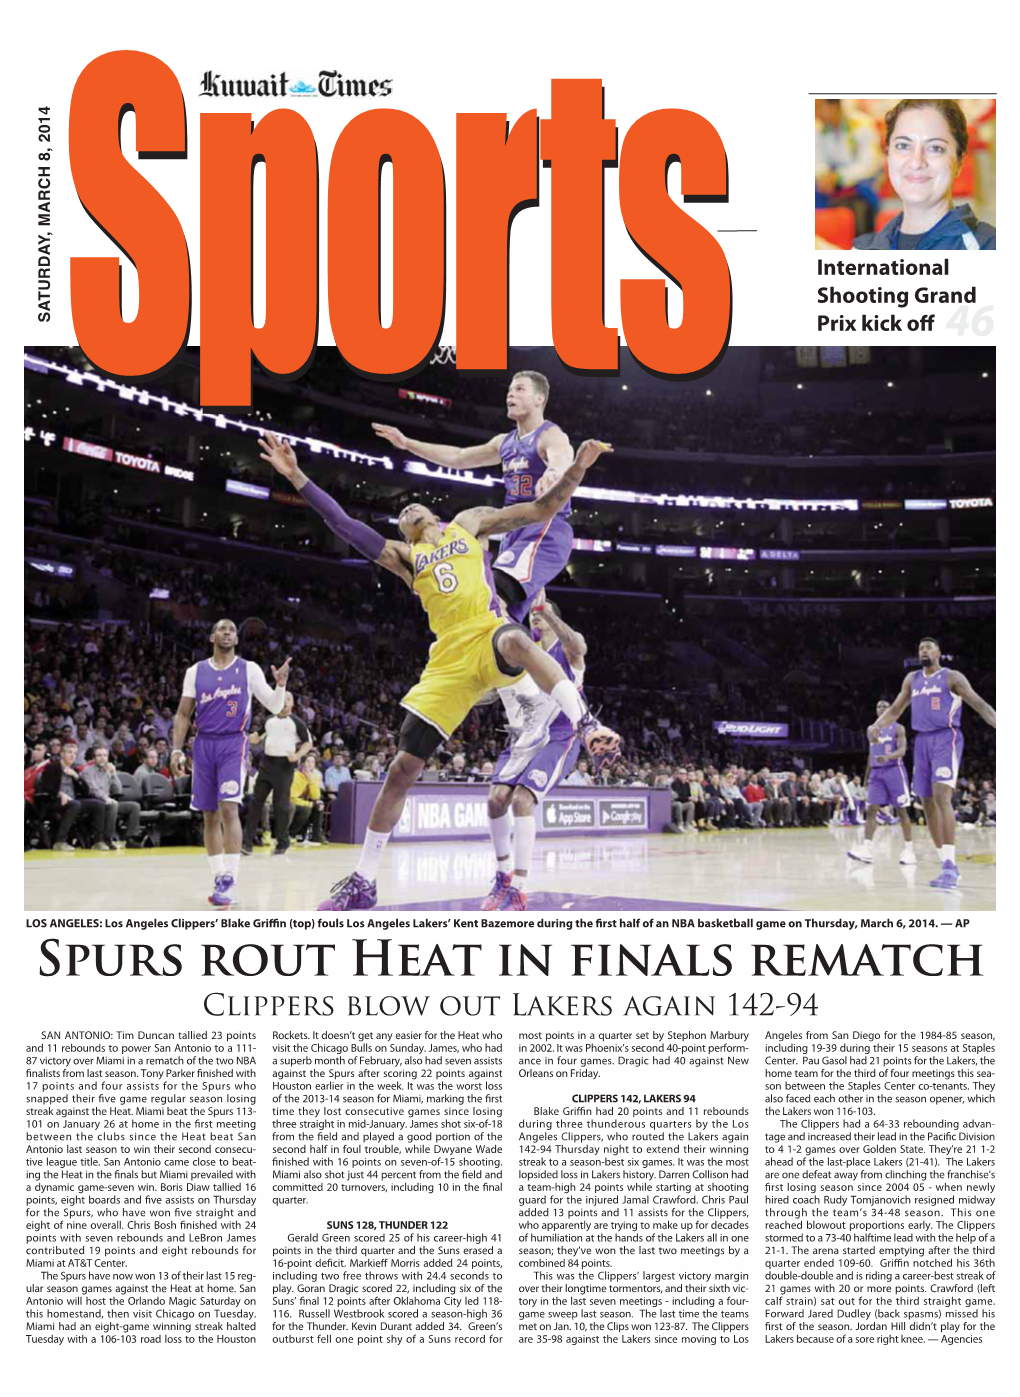 Spurs Rout Heat in Finals Rematch Clippers Blow out Lakers Again 142-94